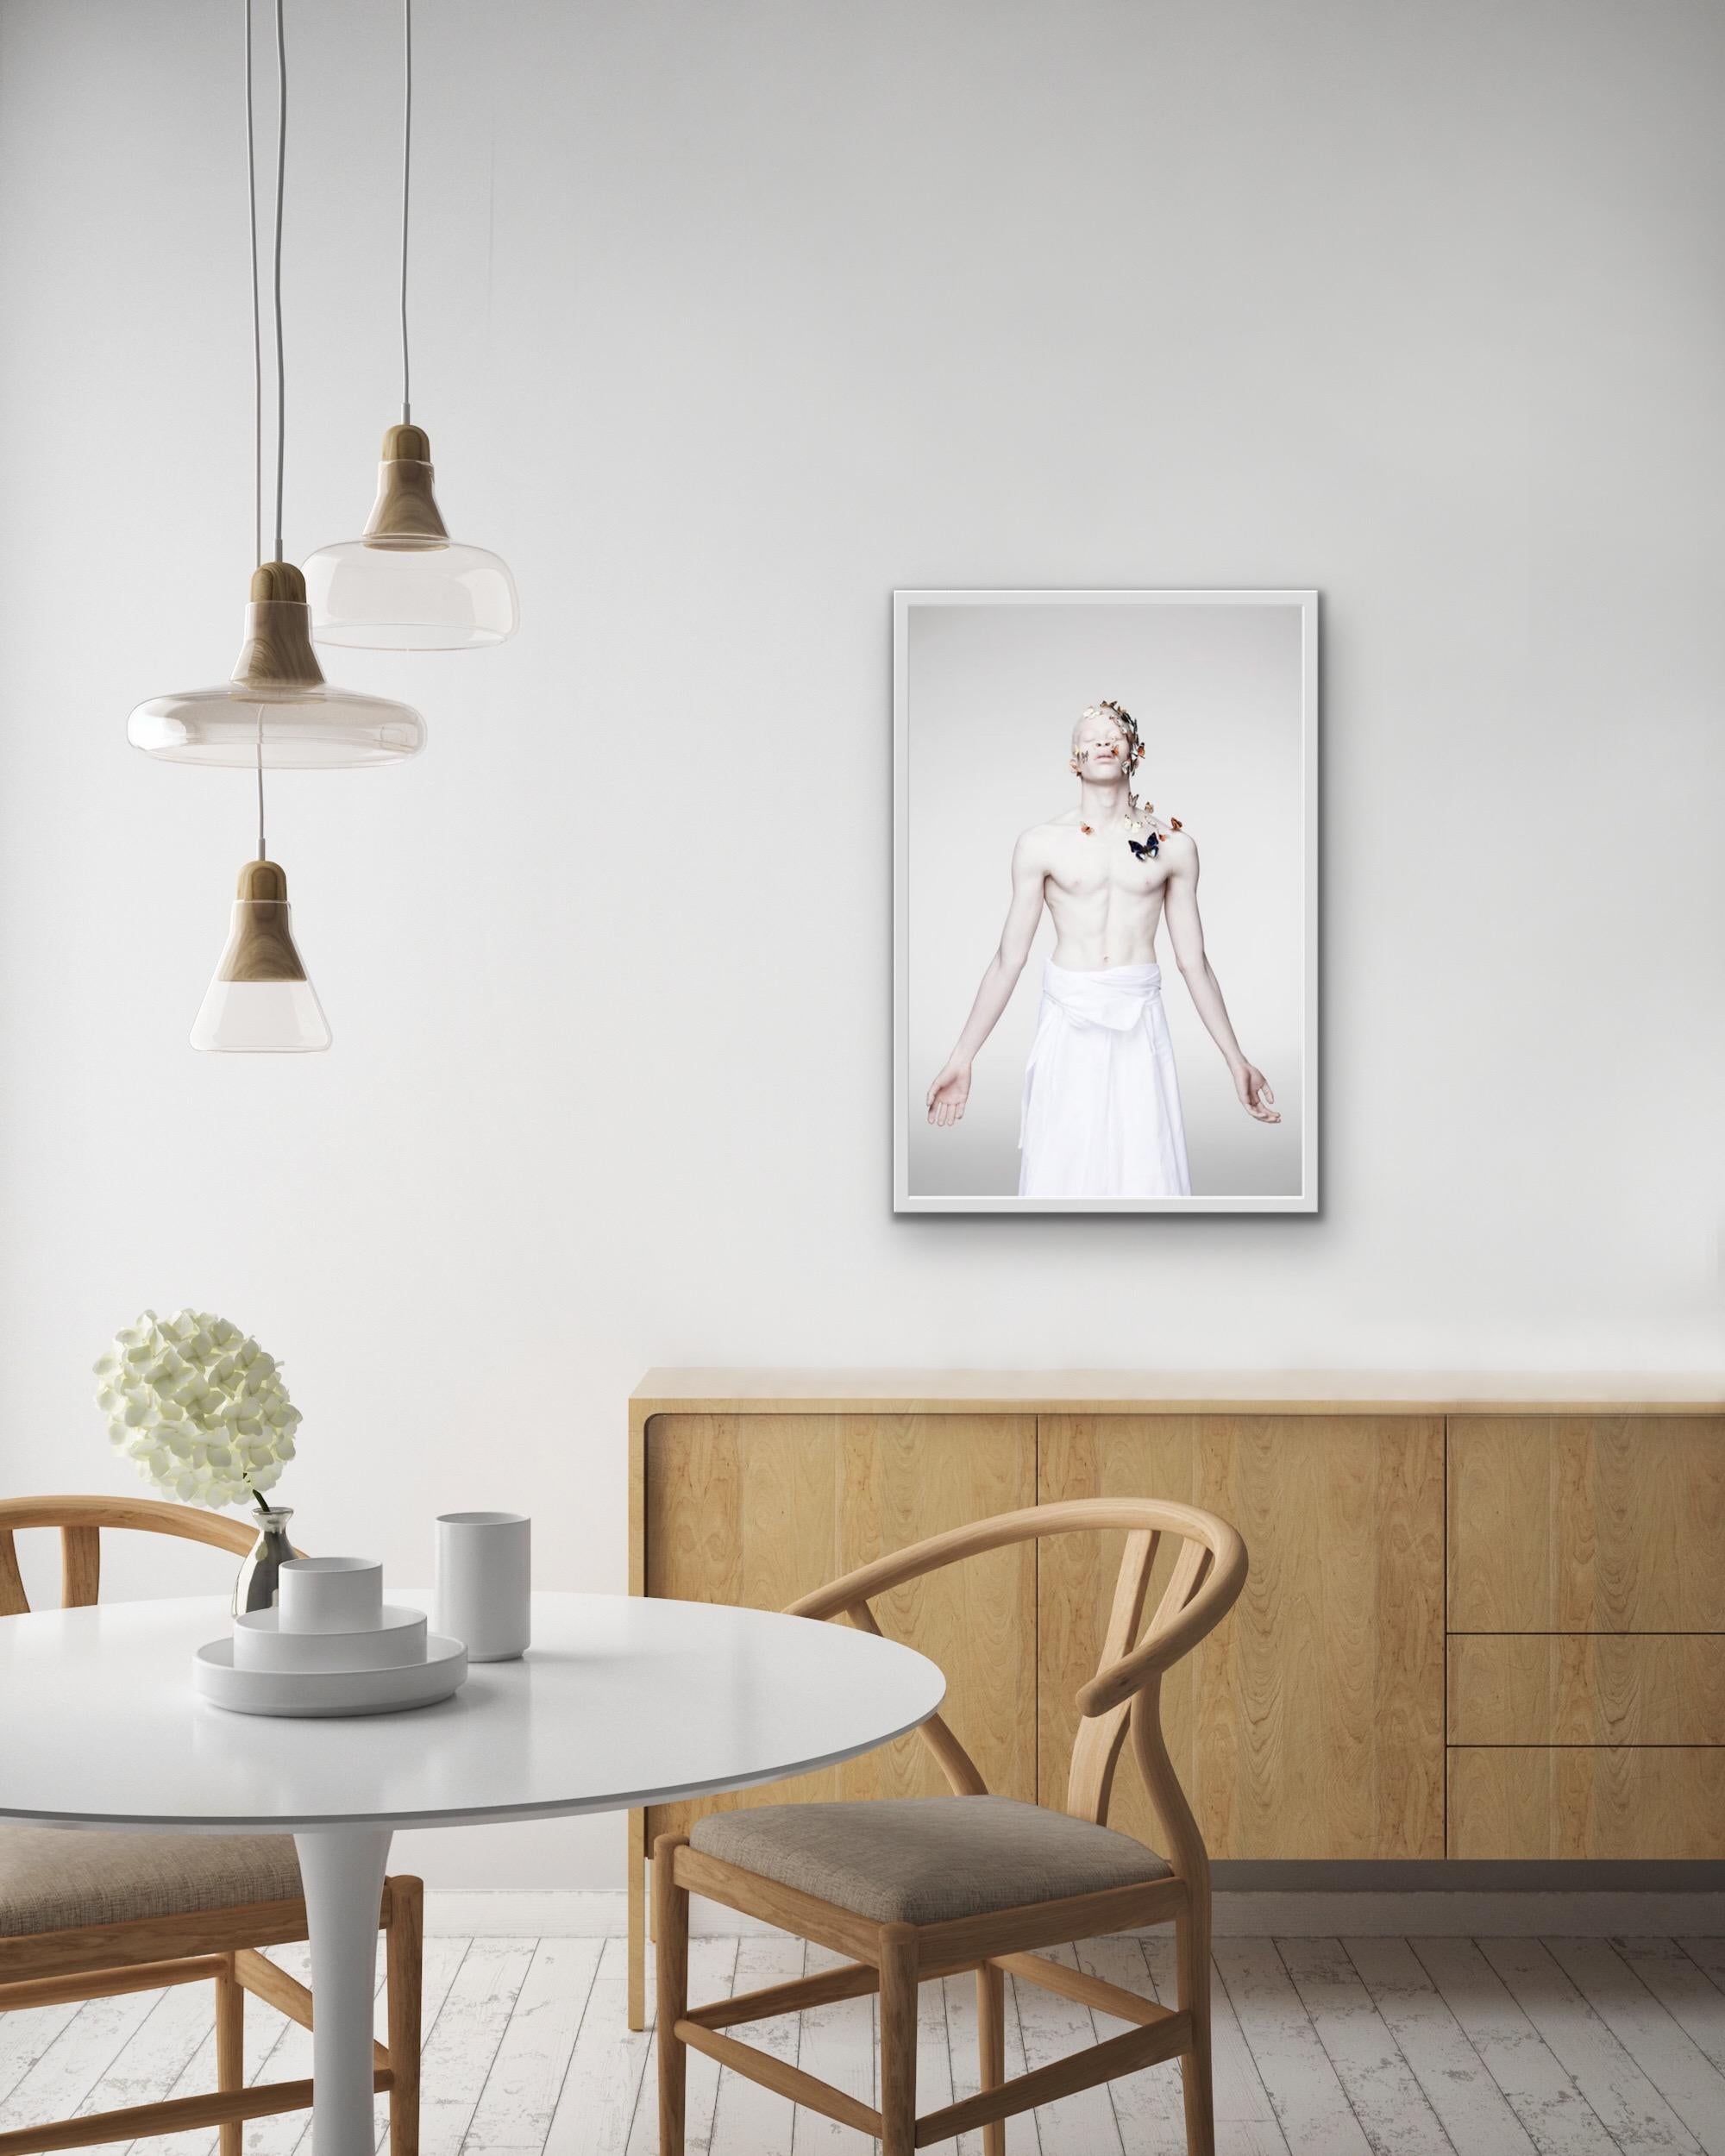 'Liberty II', Photographic glycée print on 100% cotton art paper  - Gray Portrait Print by Justin Dingwall